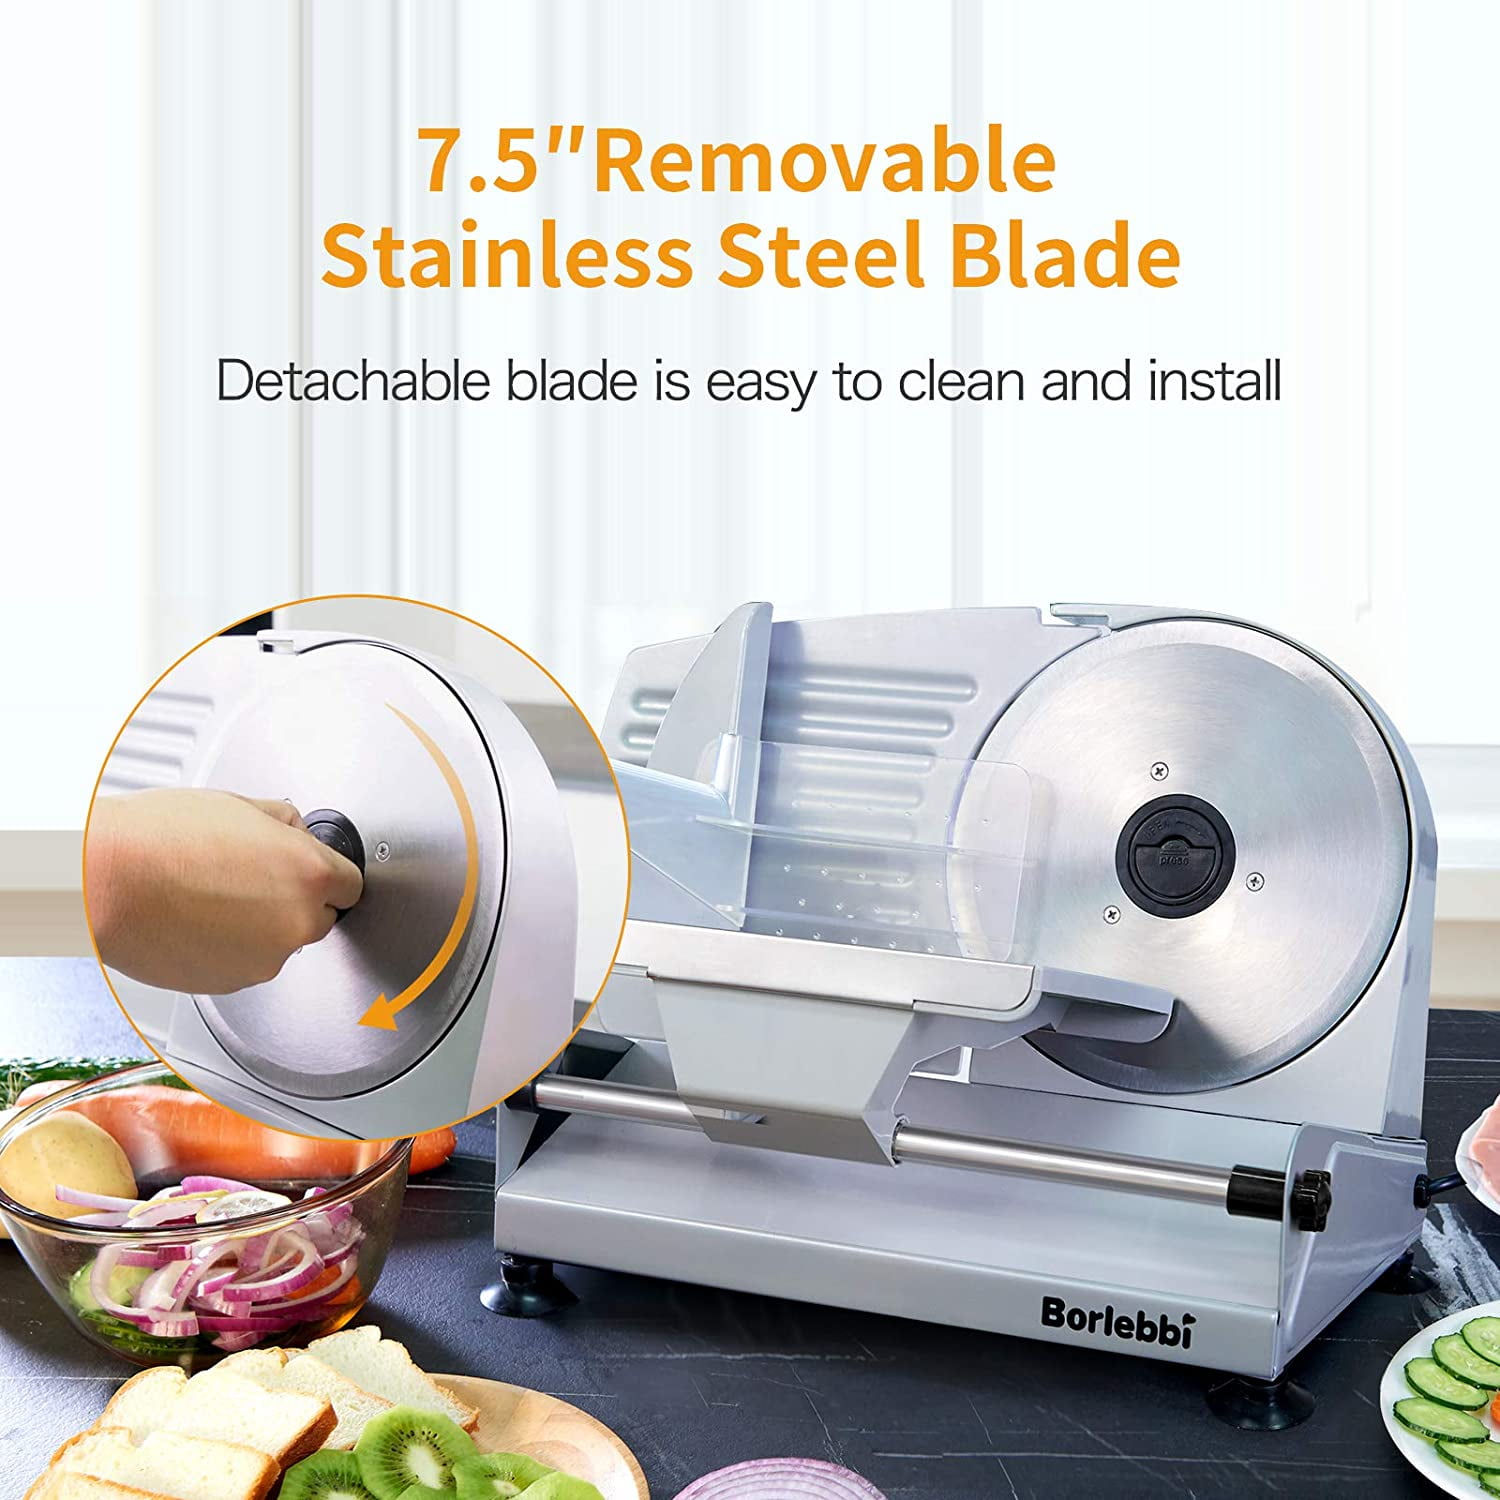 MEAT LOAF SLICER RS 2 FOR 150 80 ISA Soft Food Slicer Cheese Egg Luncheon  Meat Cutter BigTin Luncheon Meat Slicer For Food Cheese Sushi Boiled Egg, By Puting Bodega sa Bacolor Pampanga